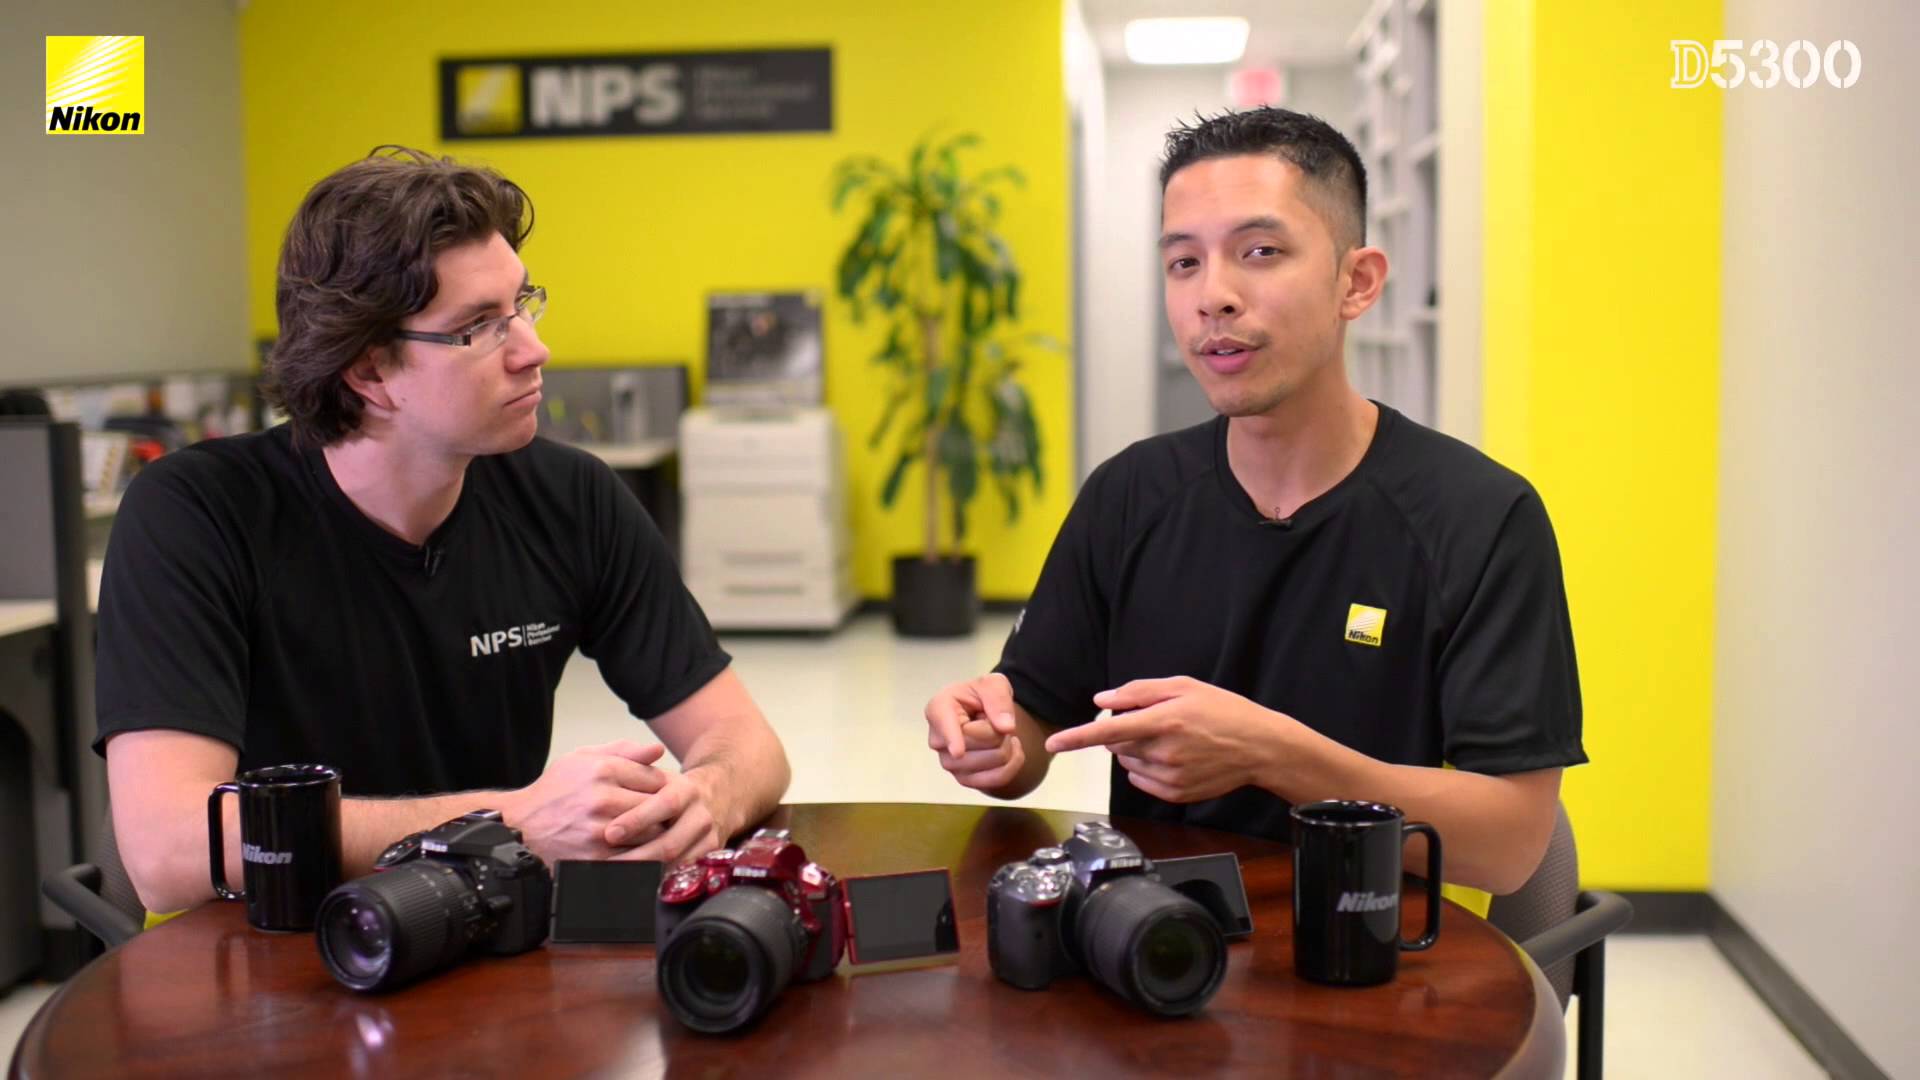 Nikon D5300 HD-SLR Camera: Featuring Wi-Fi, GPS and Low-light Capability